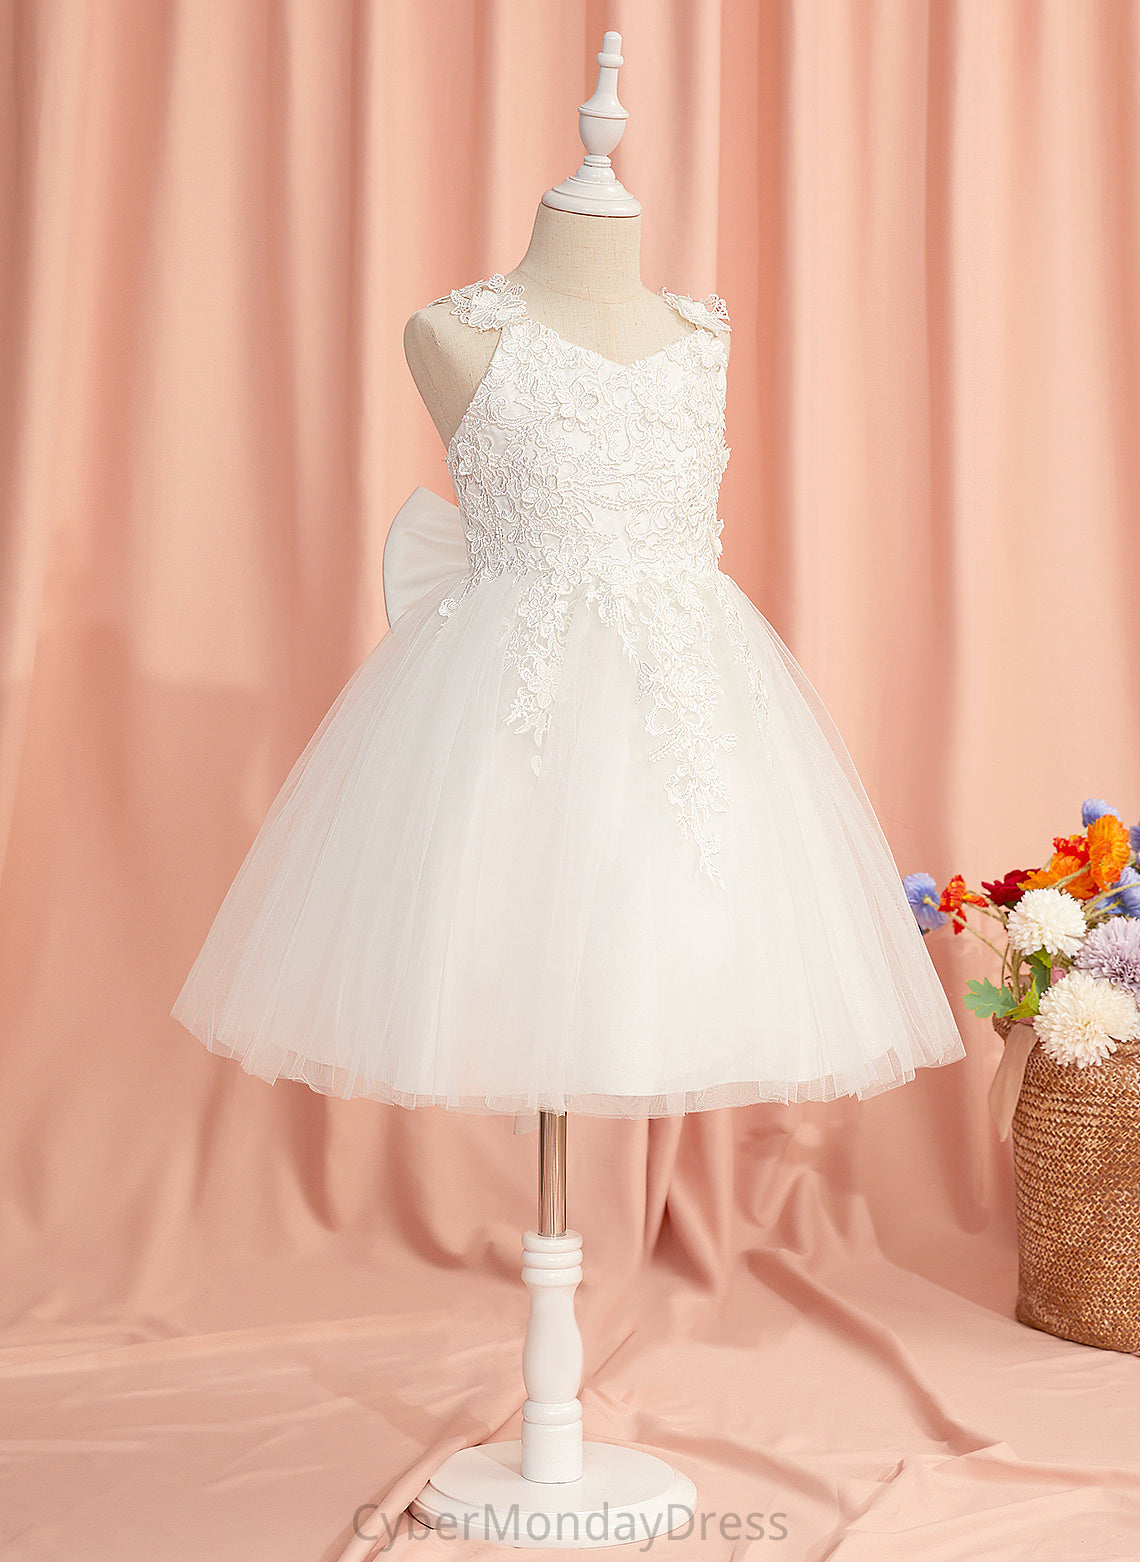 Lace/Flower(s)/Bow(s) Flower Straps Dress A-Line - Sleeveless Tulle Alexia Flower Girl Dresses Knee-length Girl With